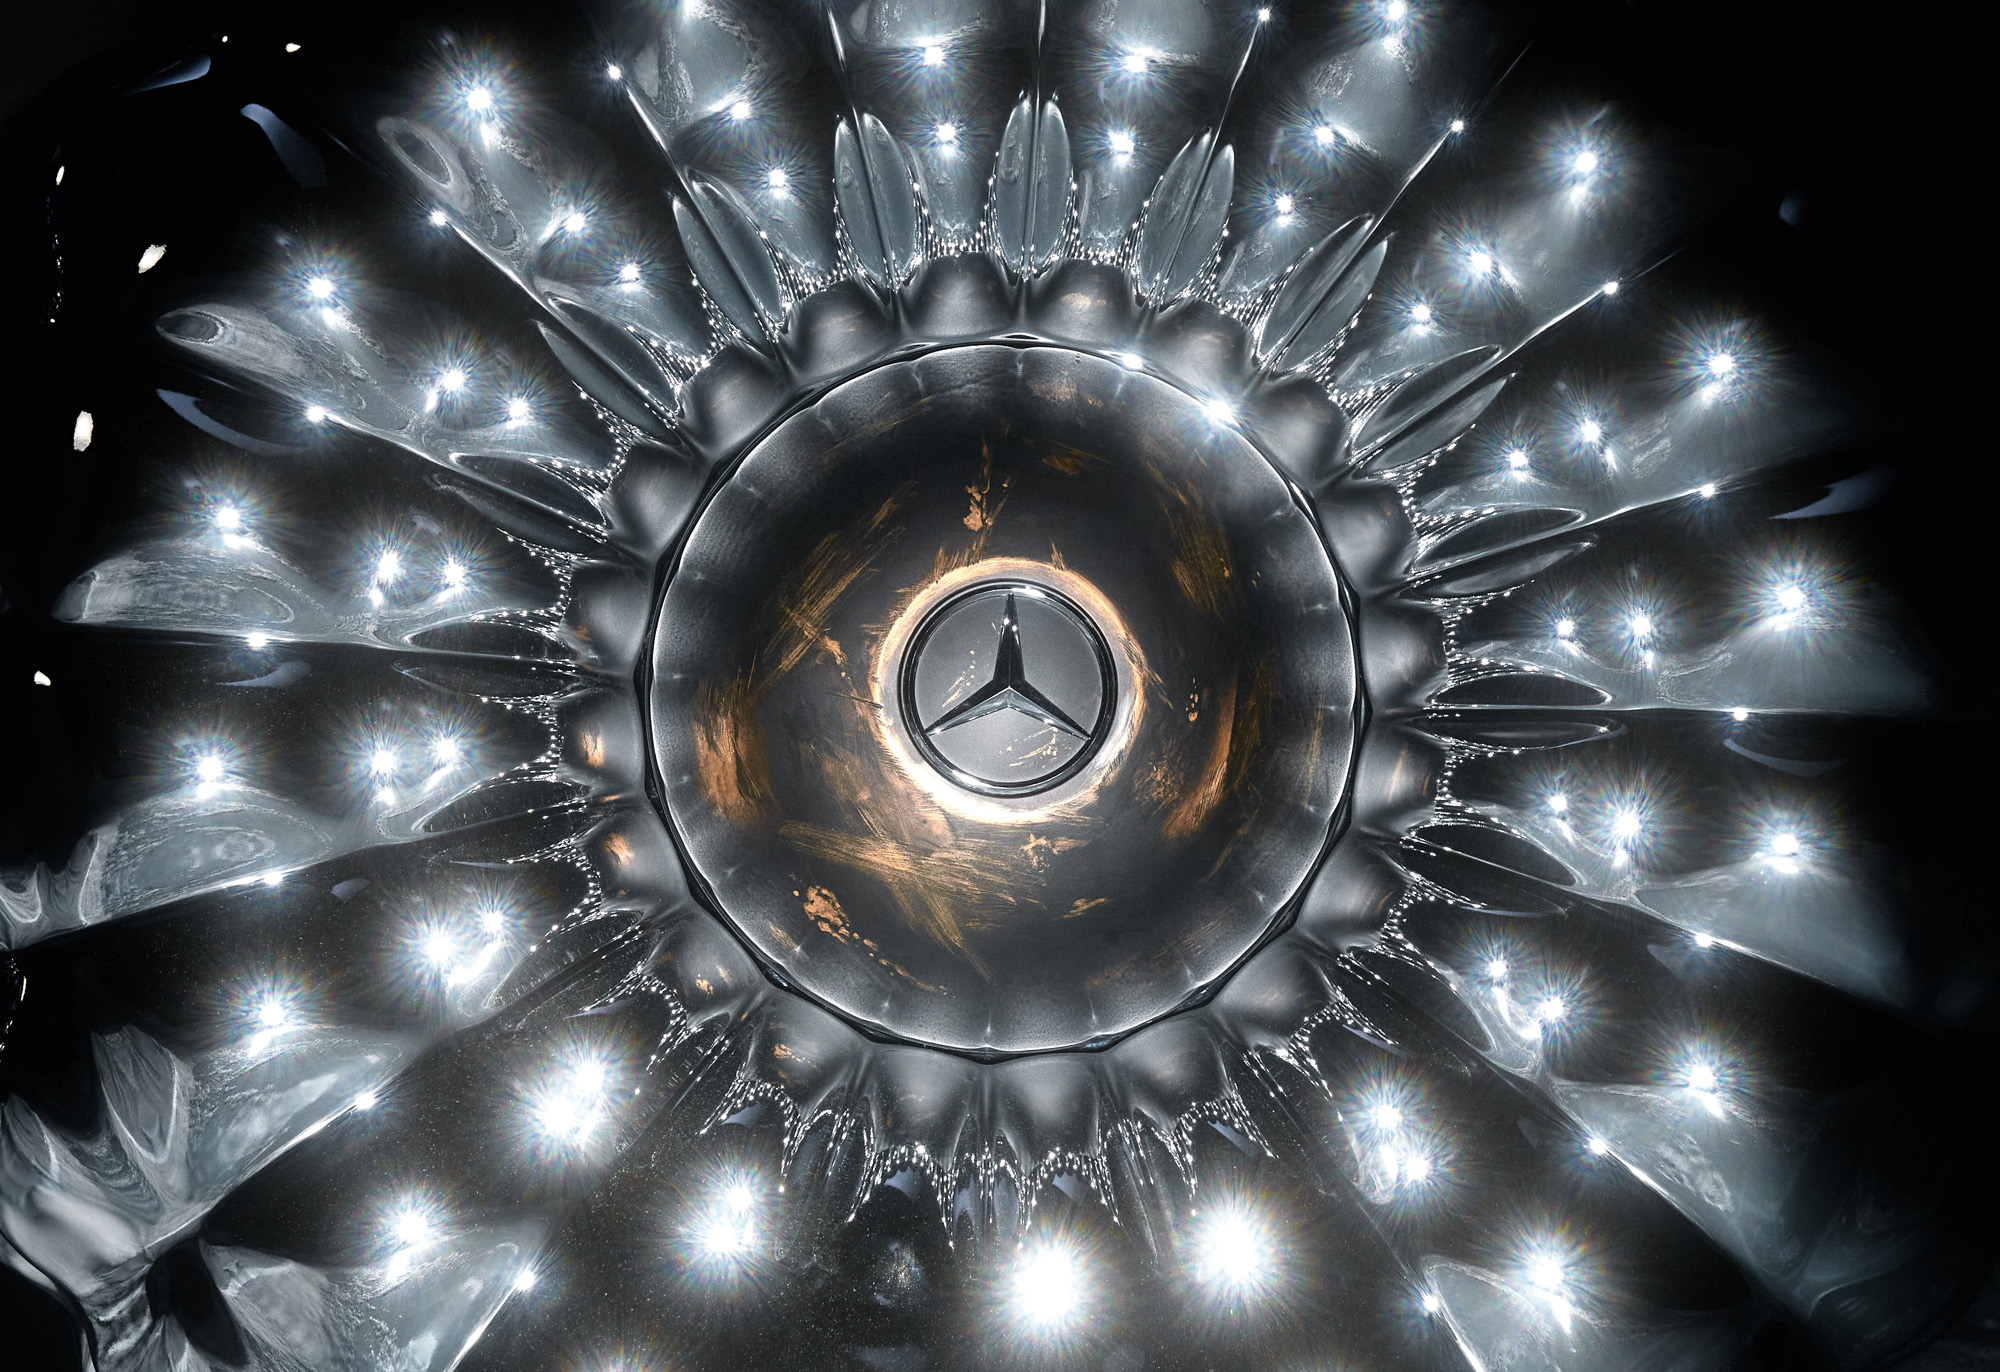 Mercedes-Maybach reveals collaboration with late fashion designer